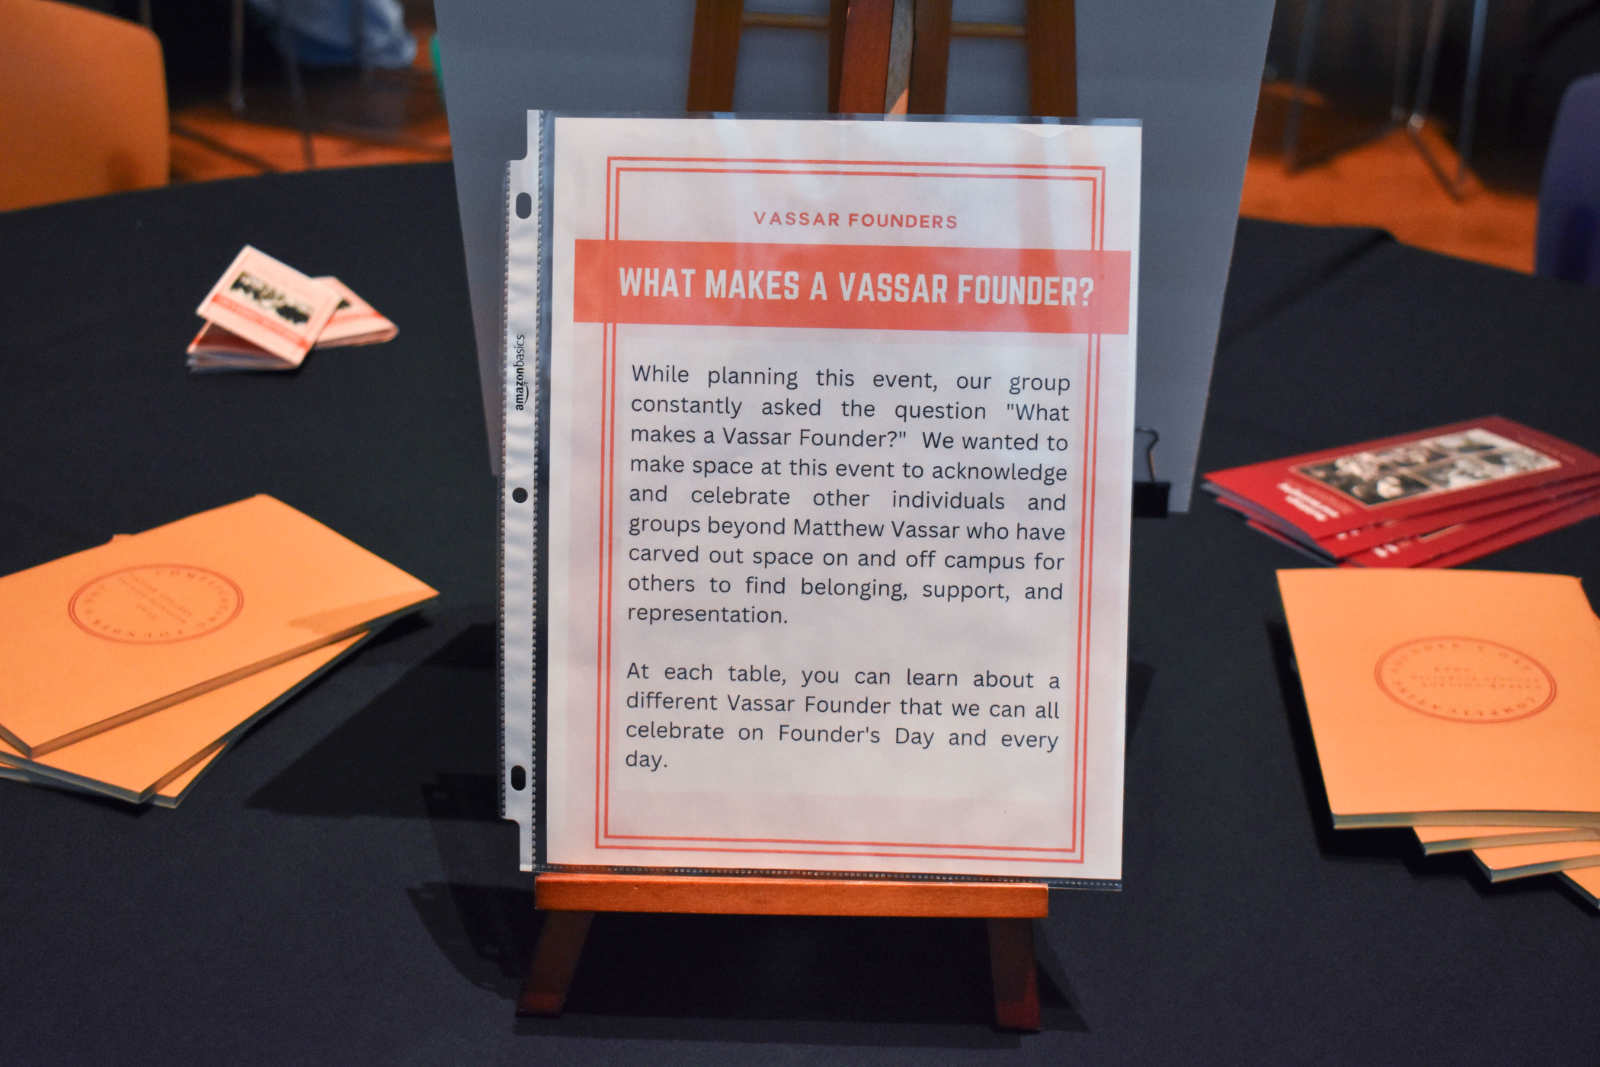 A poster placed on a table. The poster reads “Vassar Founders: What Makes a Vassar Founder? While Planning This Event, Our Group Constantly Asked the Question ‘What Makes a Vassar Founder?’.”